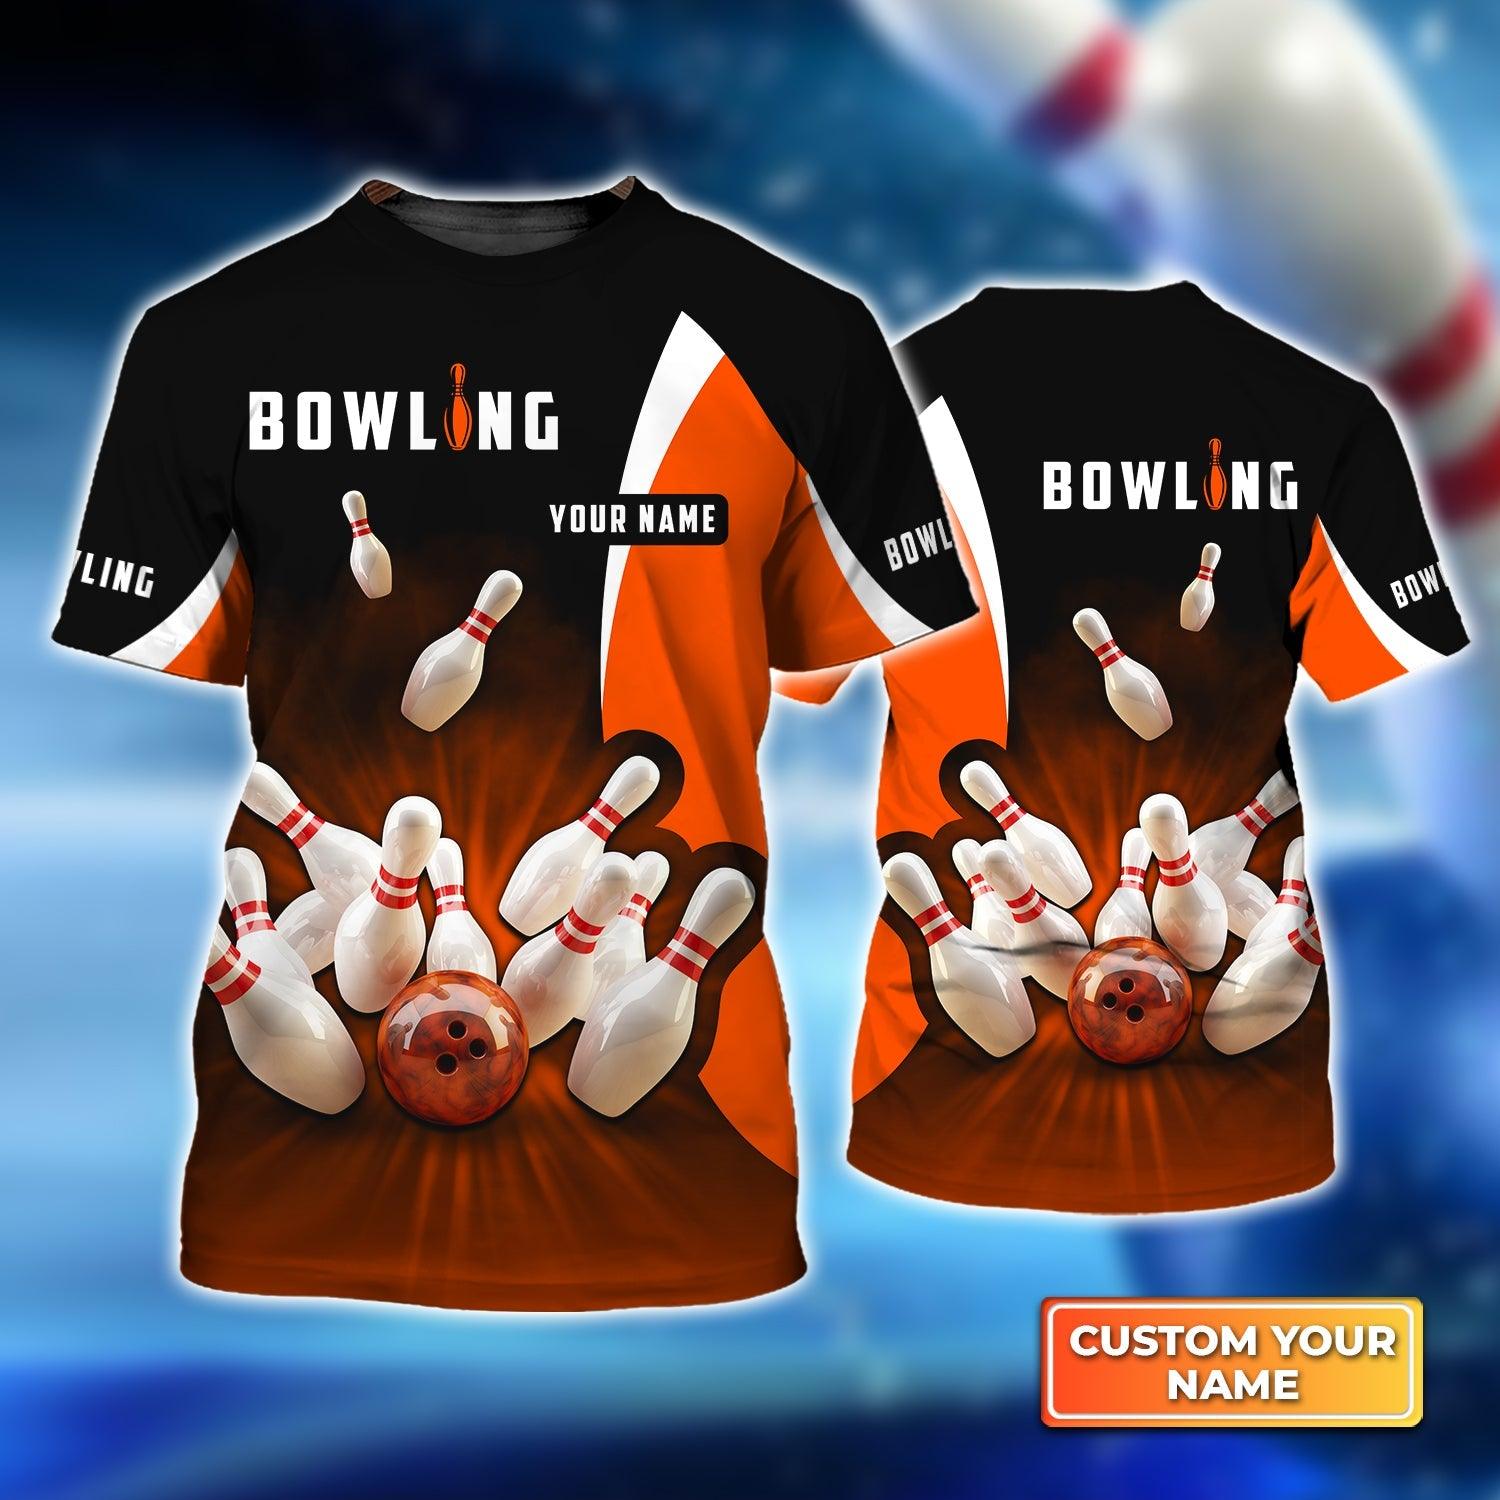 Bowling Custom Name T Shirt, Perfect Orange Strike Bowling Personalized T-Shirt For Men, Gift For Bowling Lovers, Bowlers, Team, Friend - Amzanimalsgift